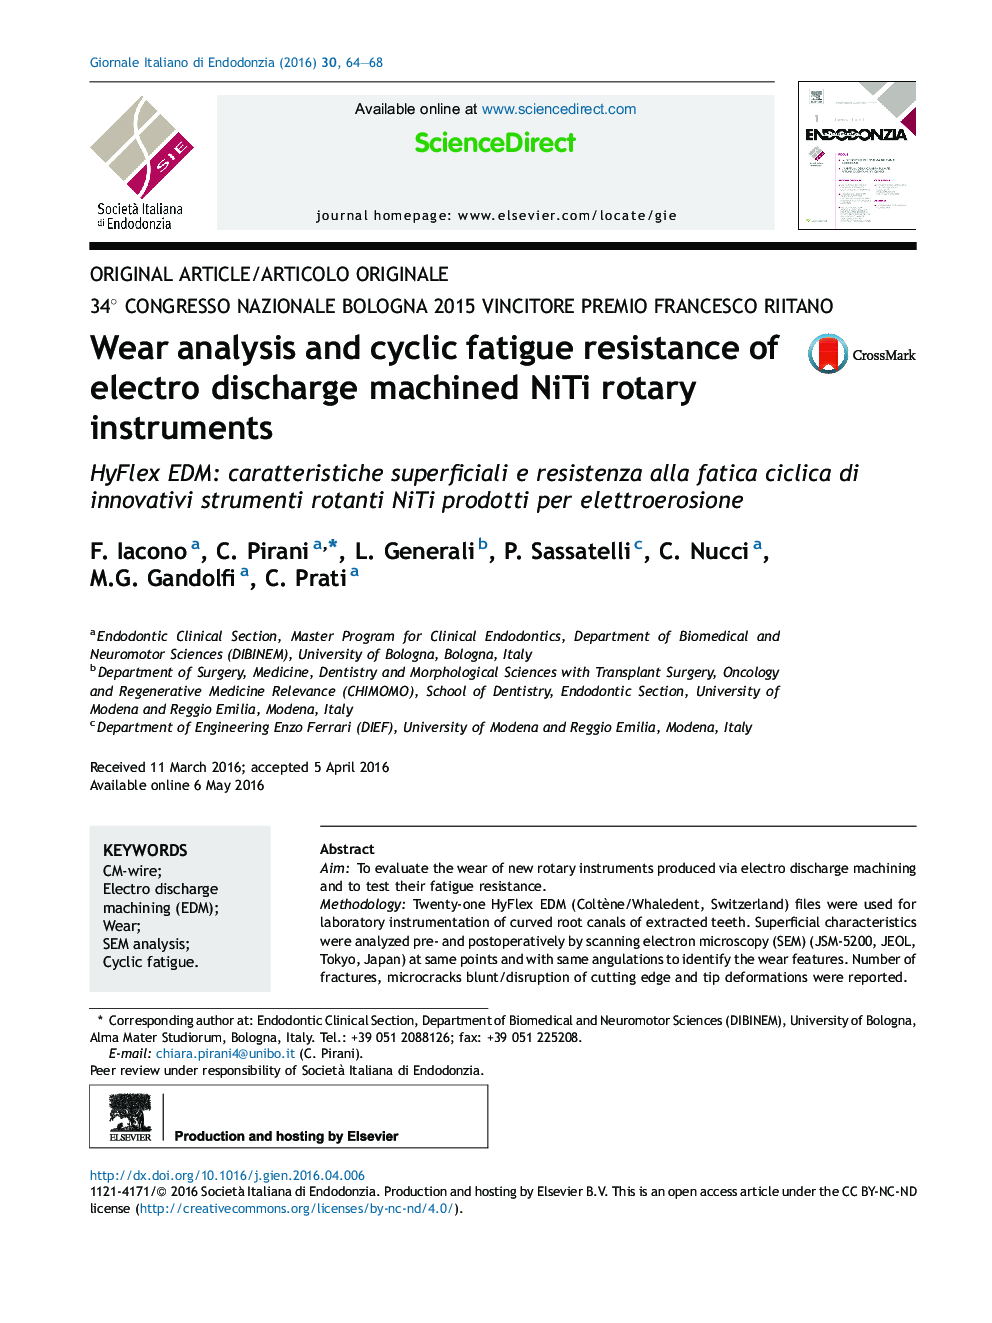 Wear analysis and cyclic fatigue resistance of electro discharge machined NiTi rotary instruments 